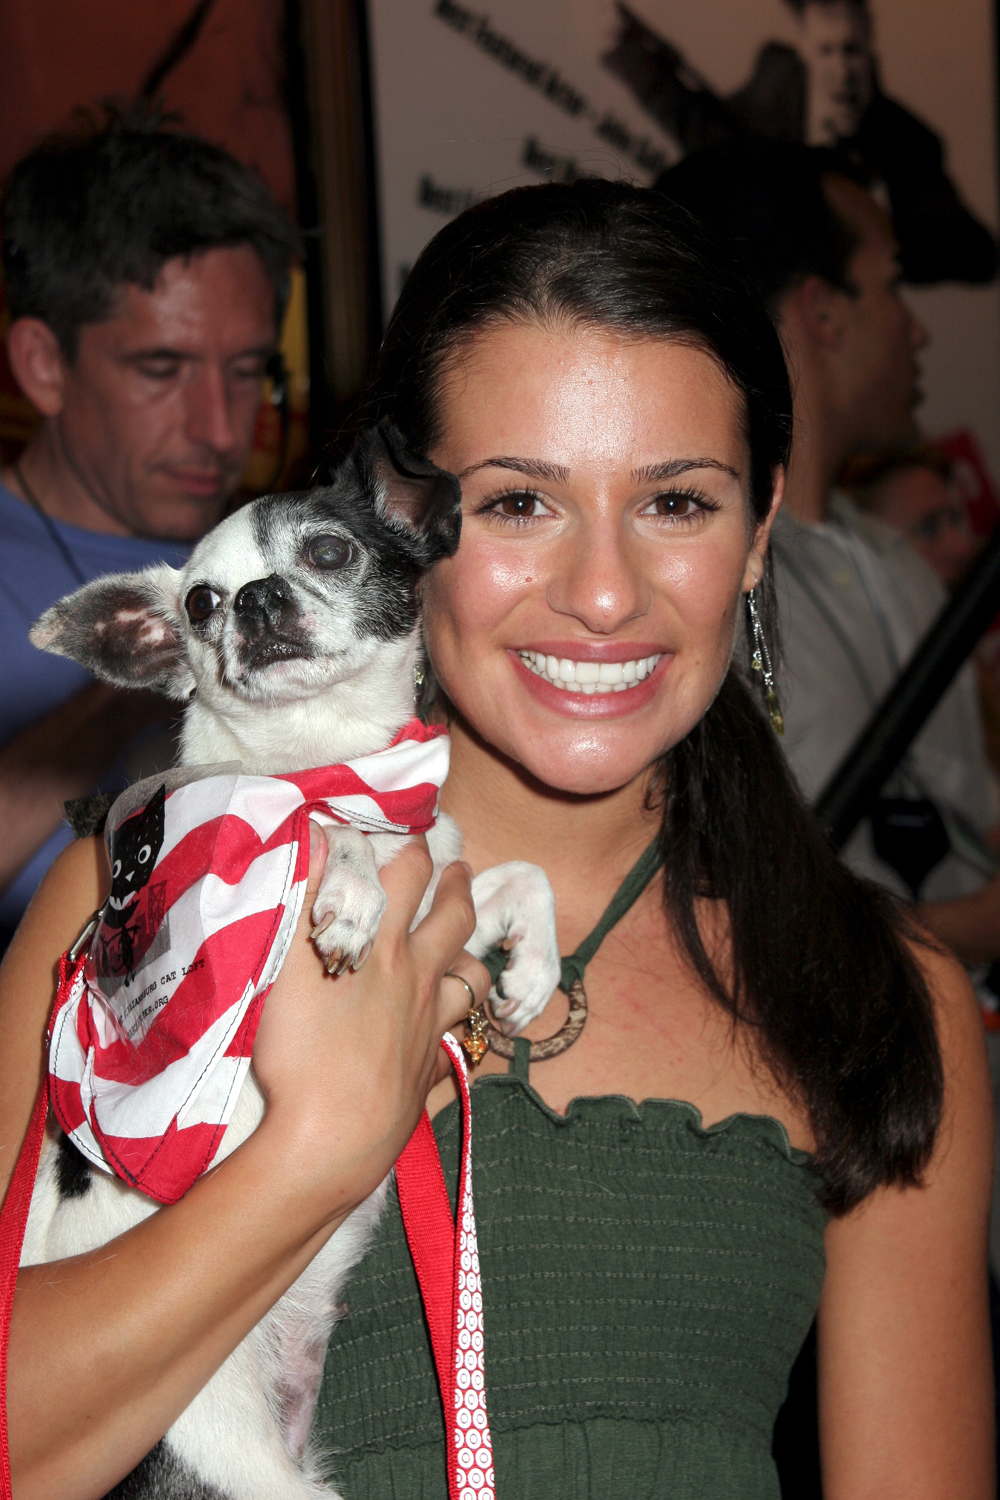 Puppy love! Lea Michele smiles while with her pooch during the Broadway Barks event in New York